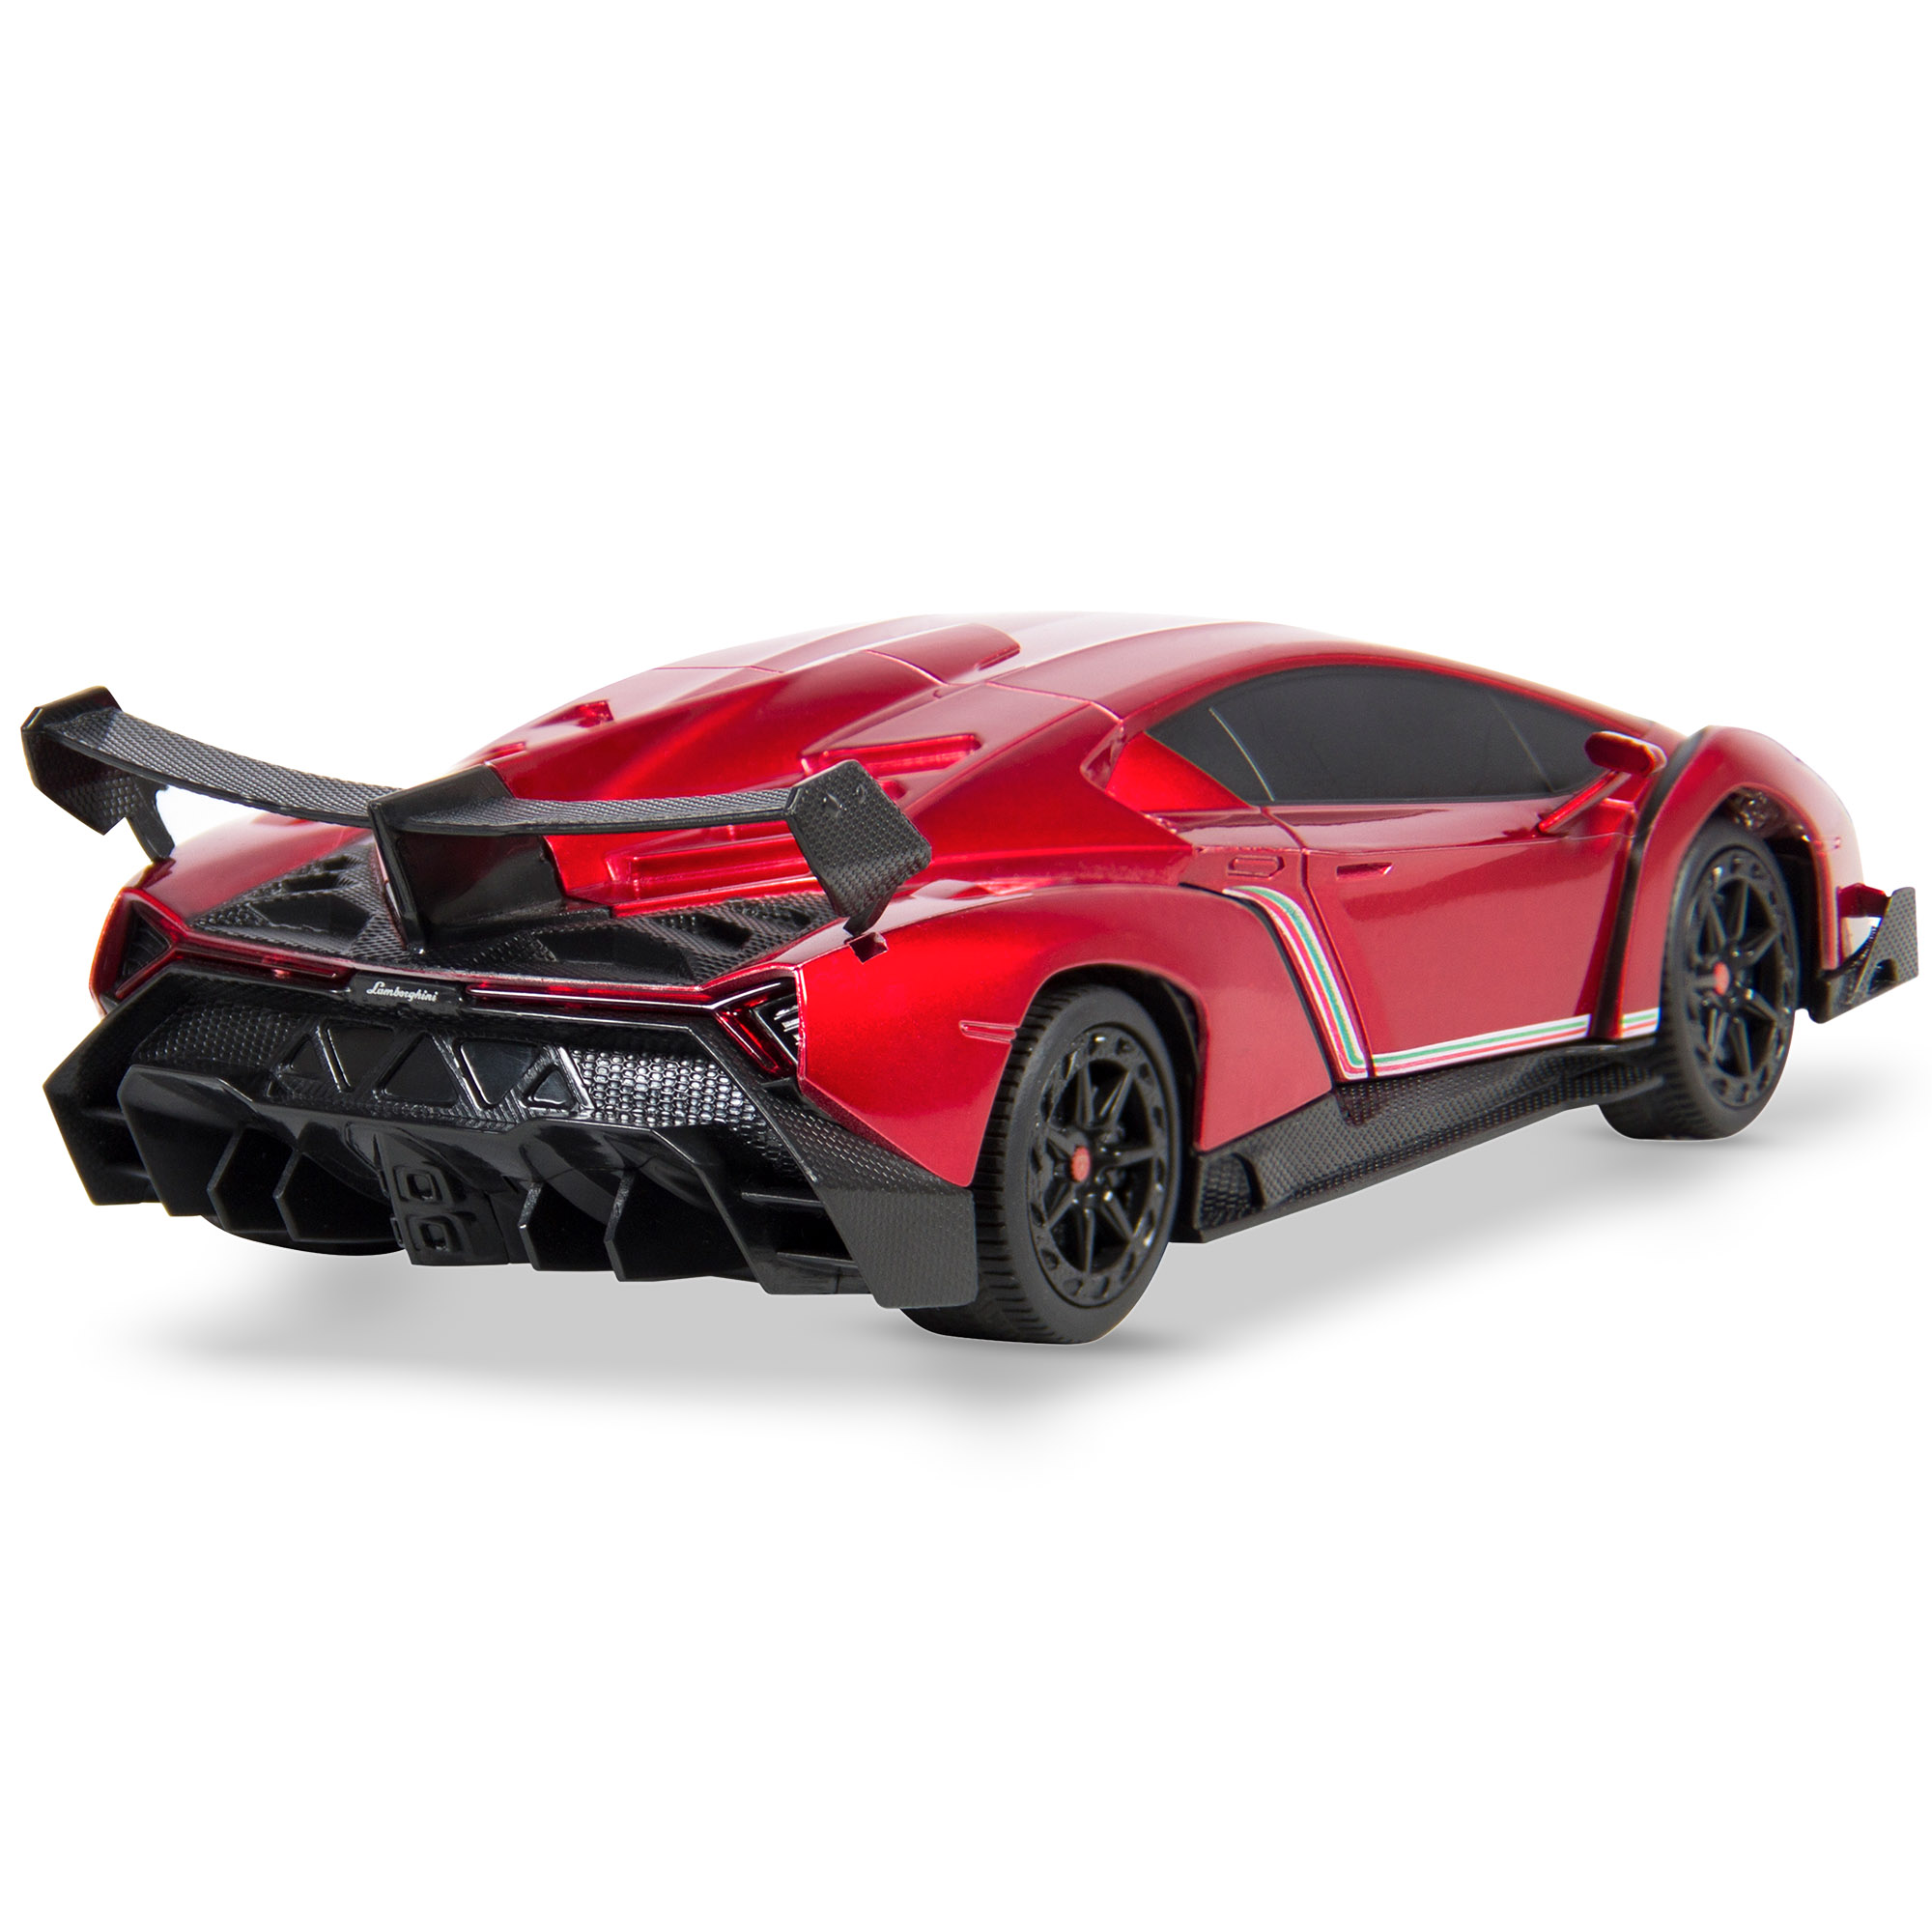 Best Choice Products 1/24 Officially Licensed RC Lamborghini Veneno Sport Racing Car w/ 2.4GHz Remote Control - Red - image 2 of 6